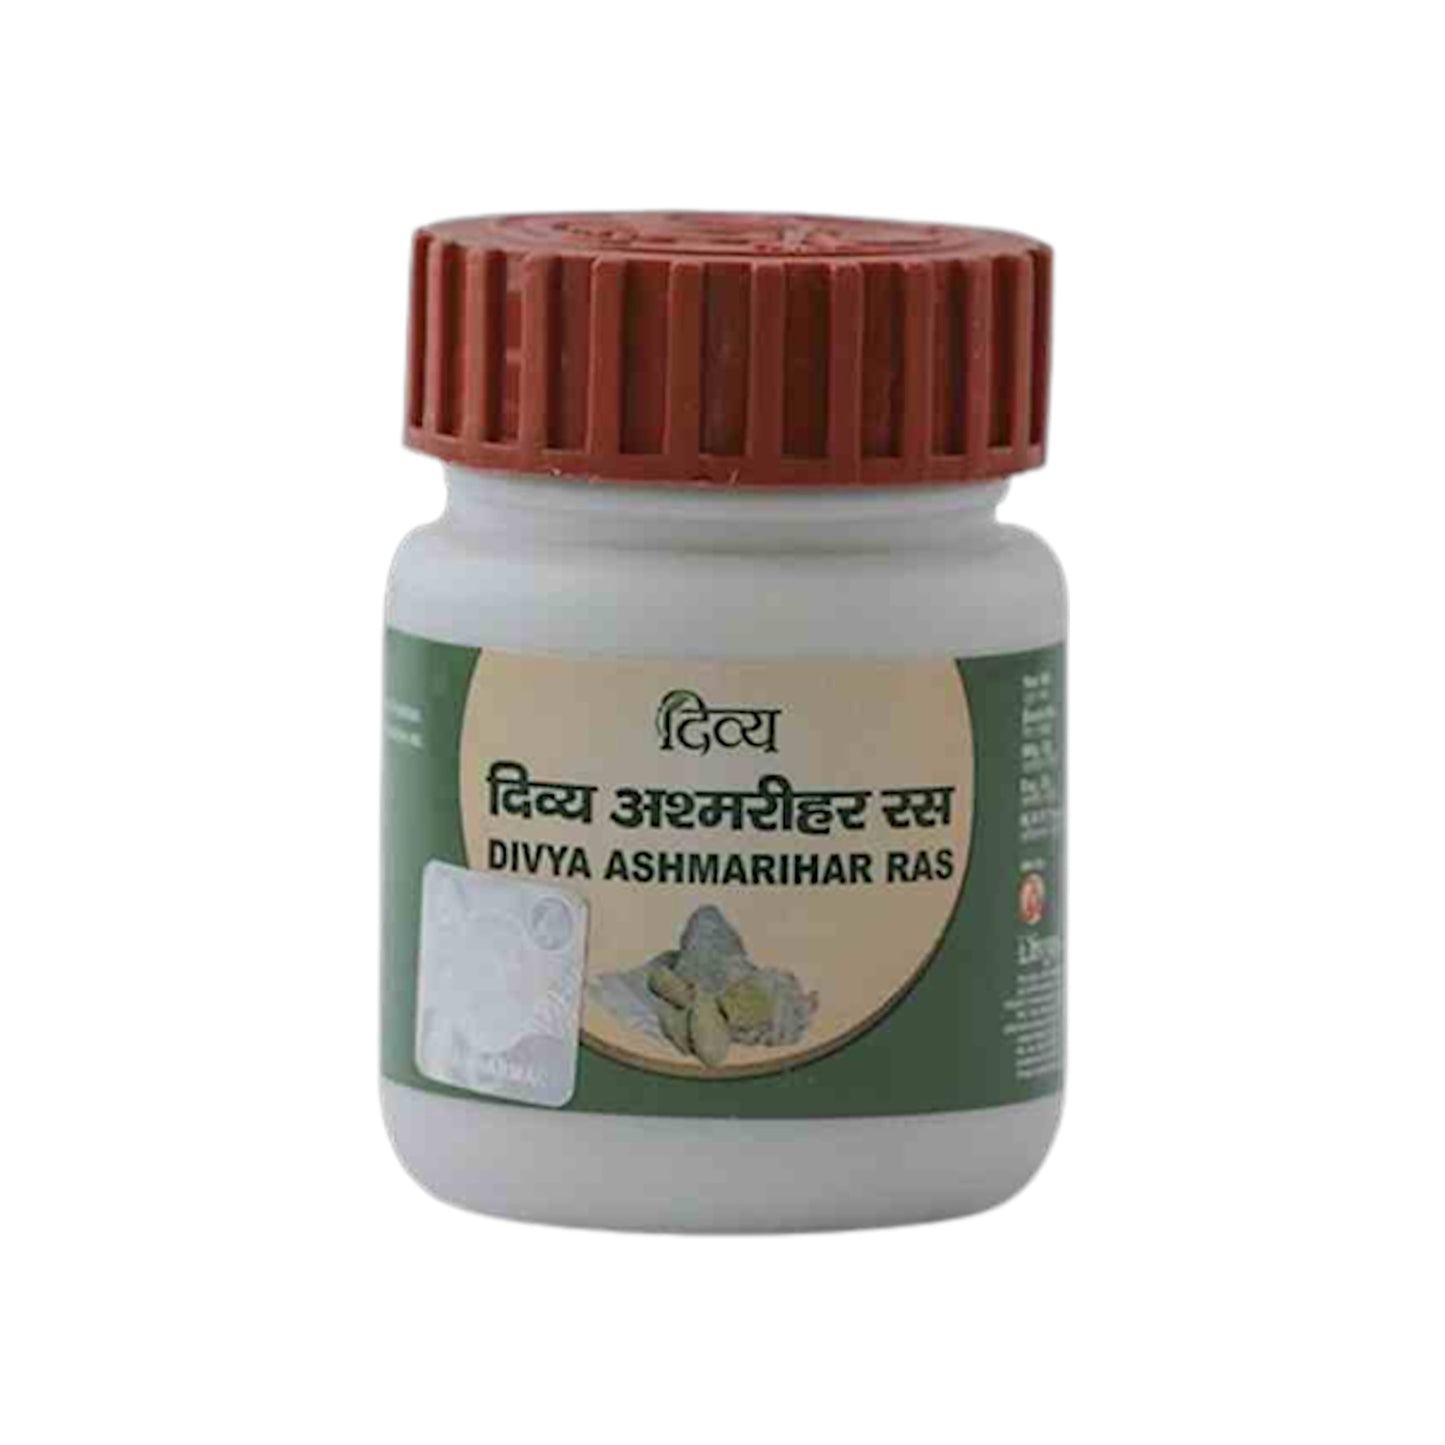 Image for Divya Patanjali Ashmarihar Ras Powder - 50g. Herbal remedy for kidney stones, urinary issues, and swelling.